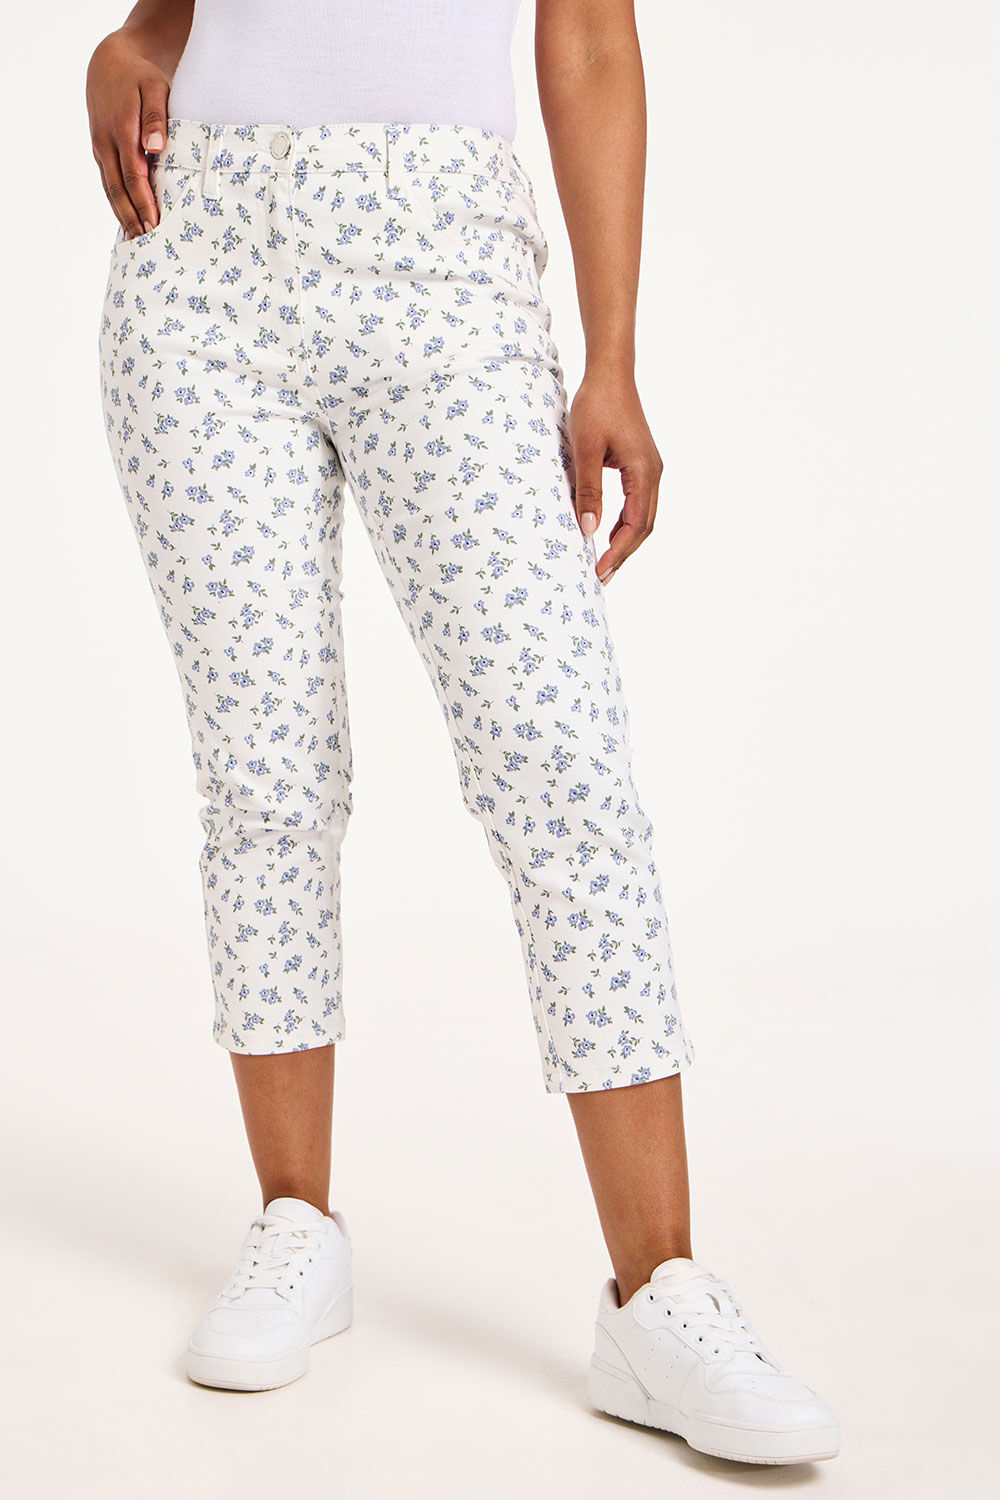 Bonmarche Ivory The Sara Meadow Floral Print Cropped Jeans, Size: 12